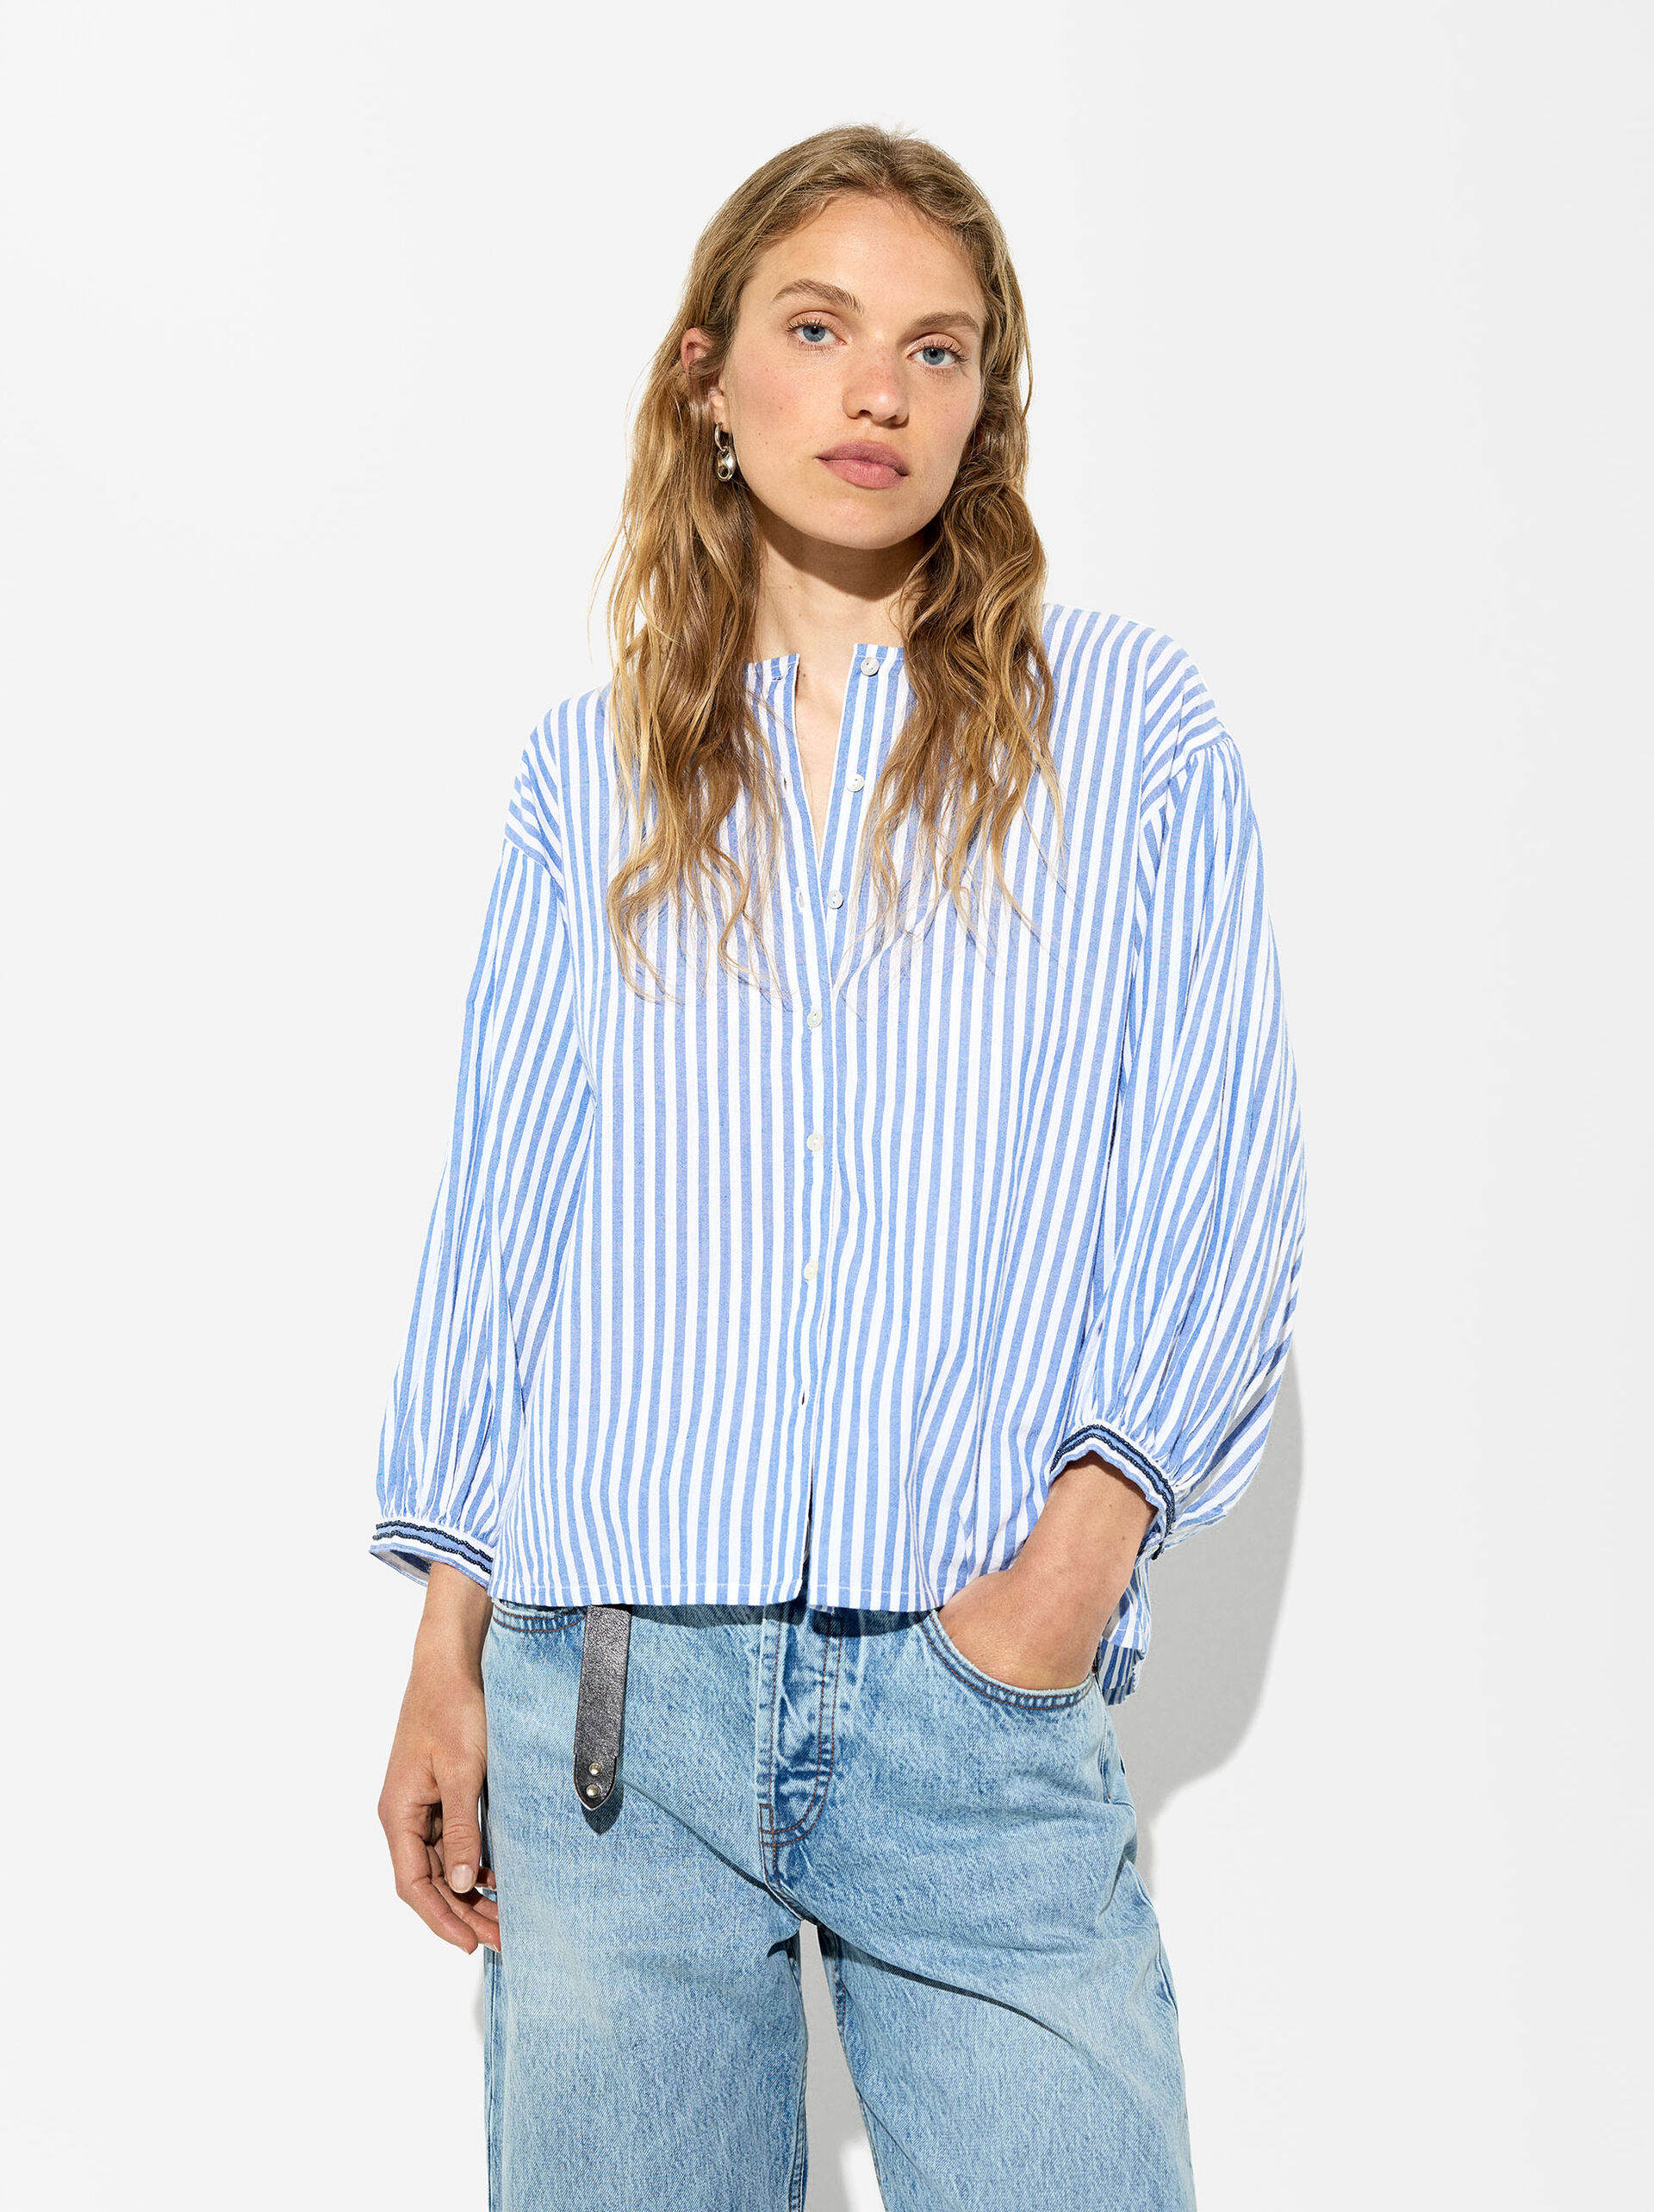 100% Cotton Striped Shirt image number 3.0